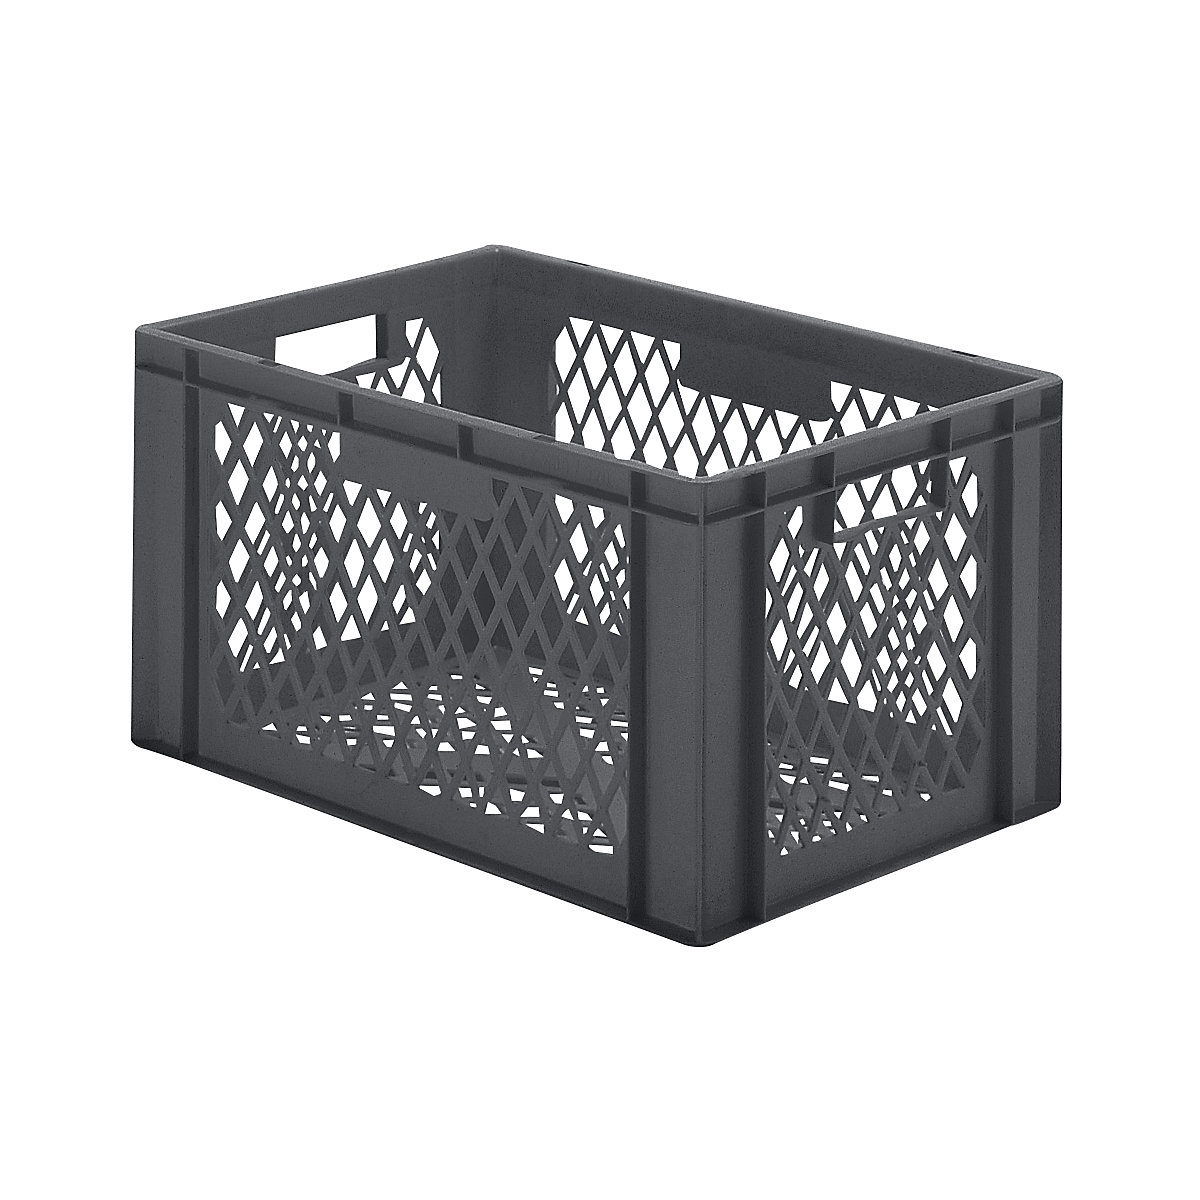 Euro stacking container, perforated walls and base, LxWxH 600 x 400 x 320 mm, grey, pack of 5